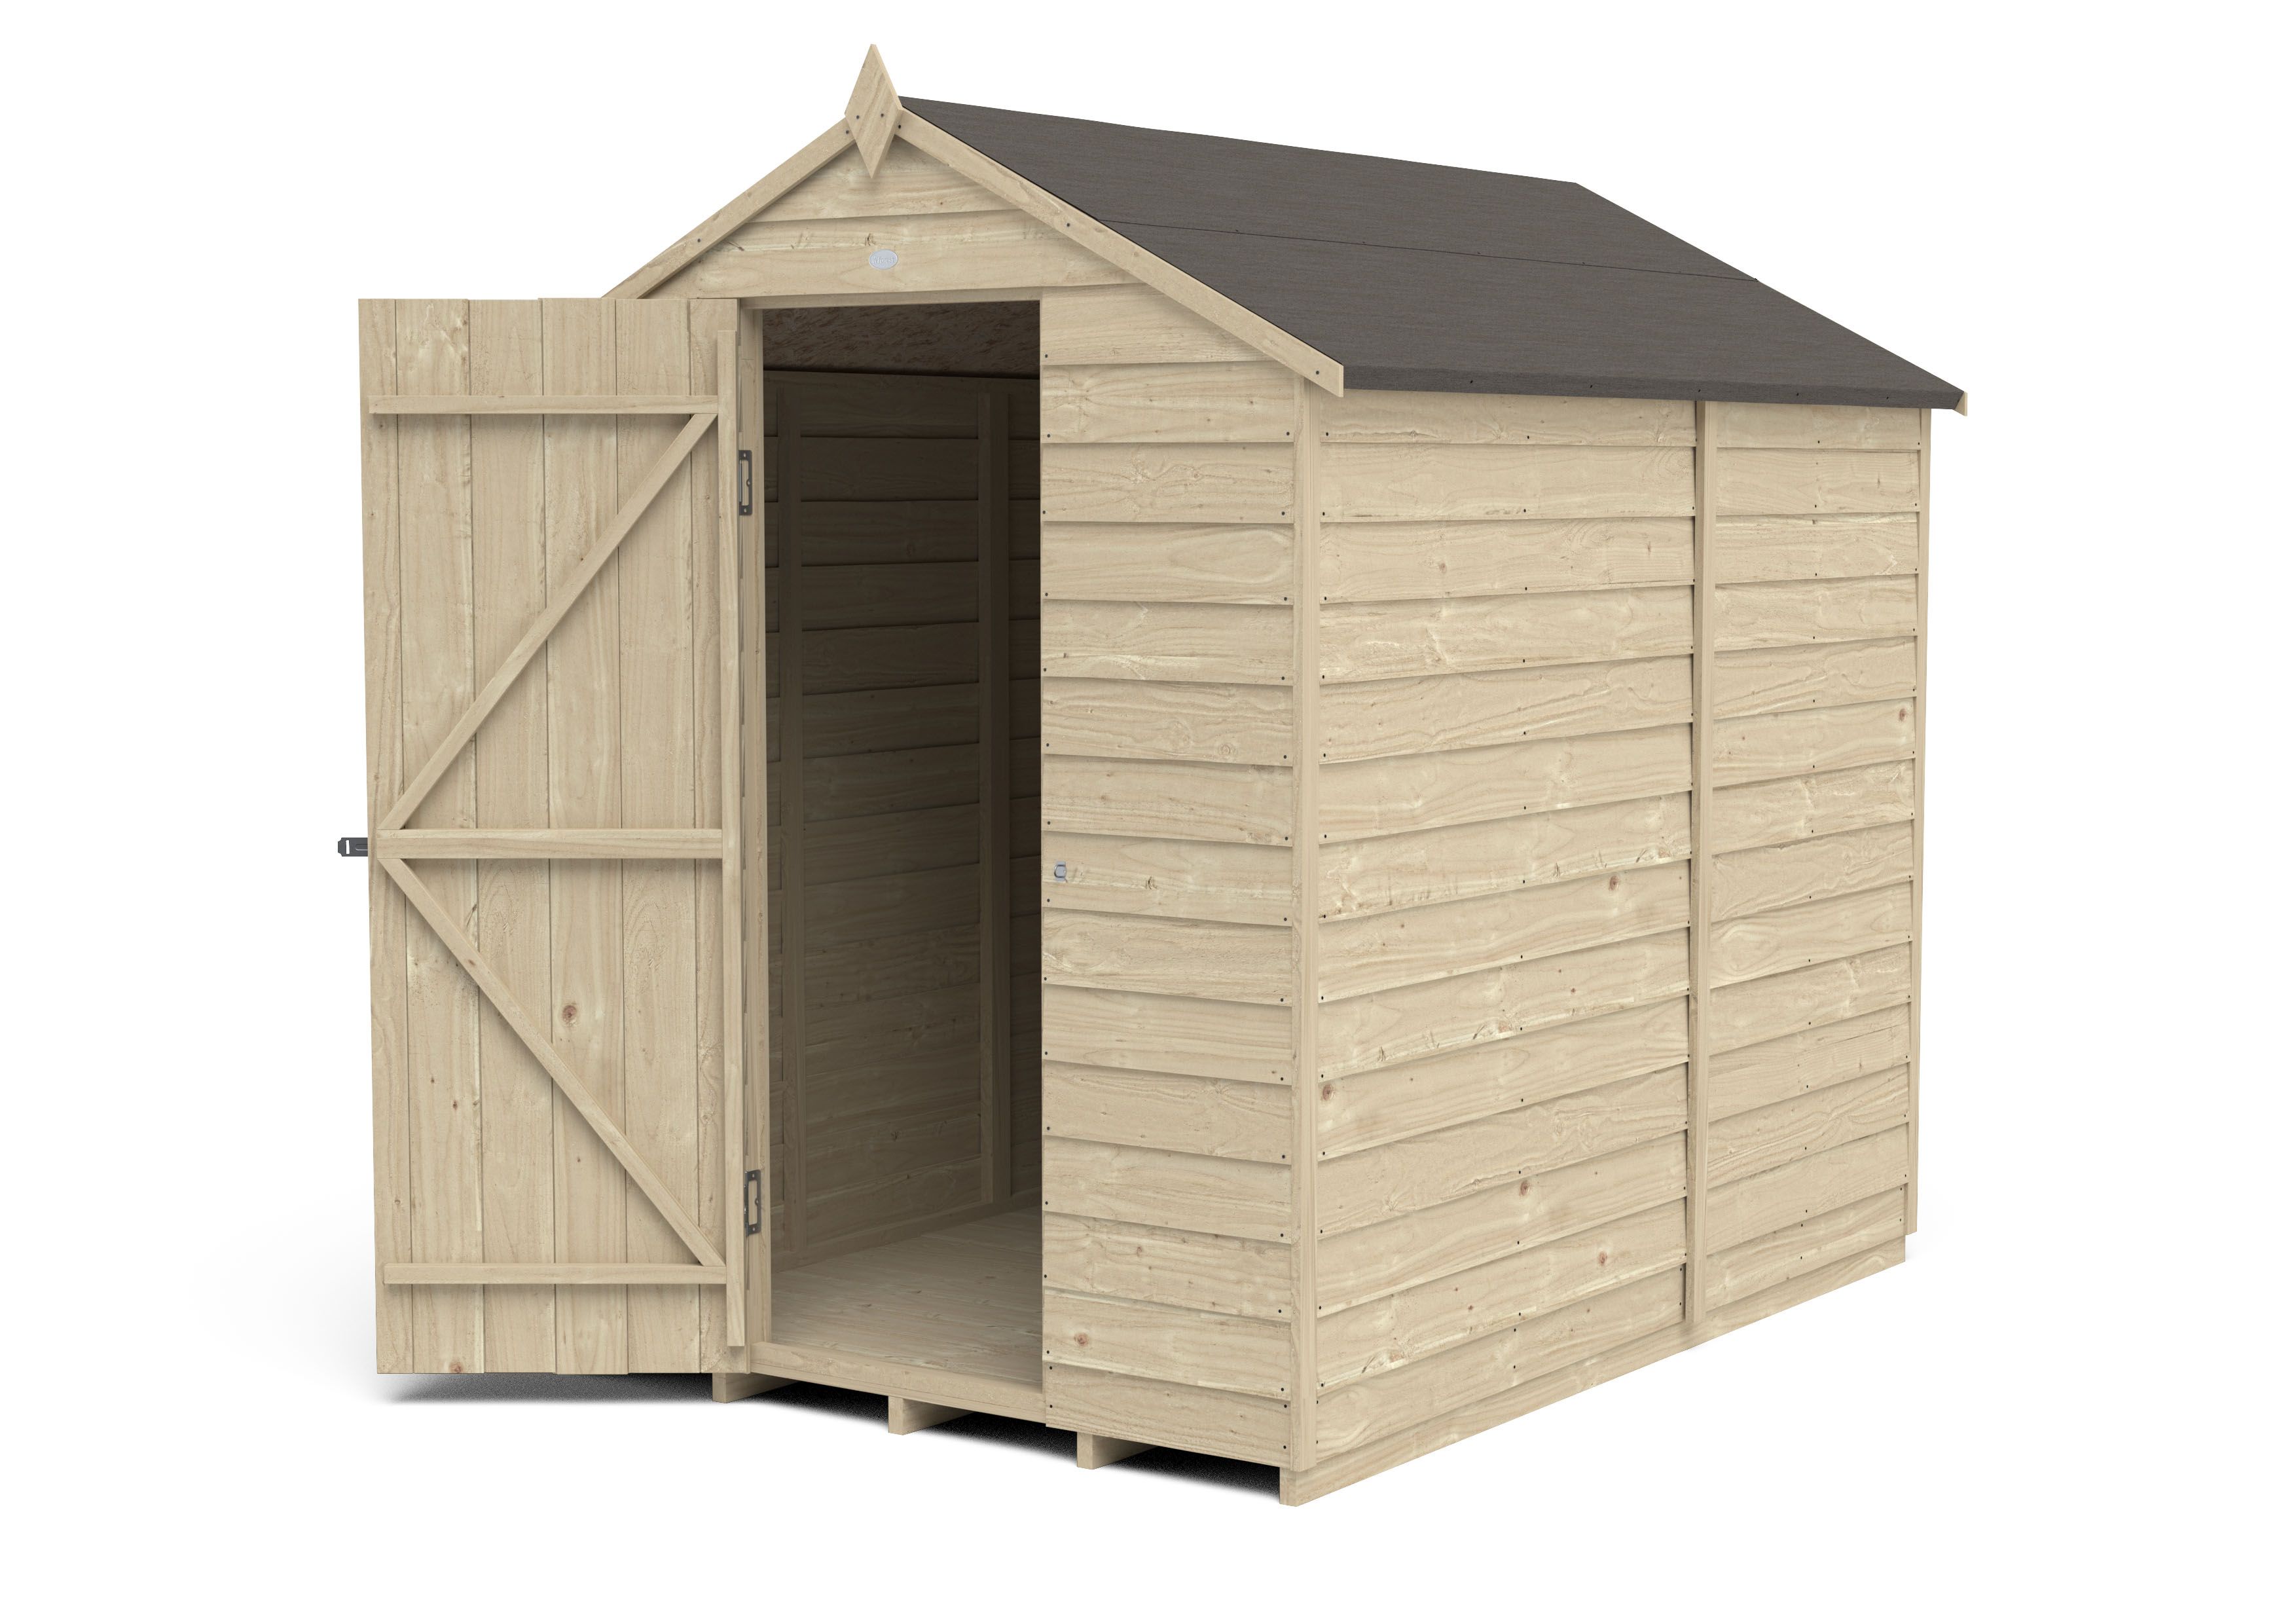 Forest Garden Overlap 7x5 ft Apex Wooden Pressure treated Shed with floor (Base included)